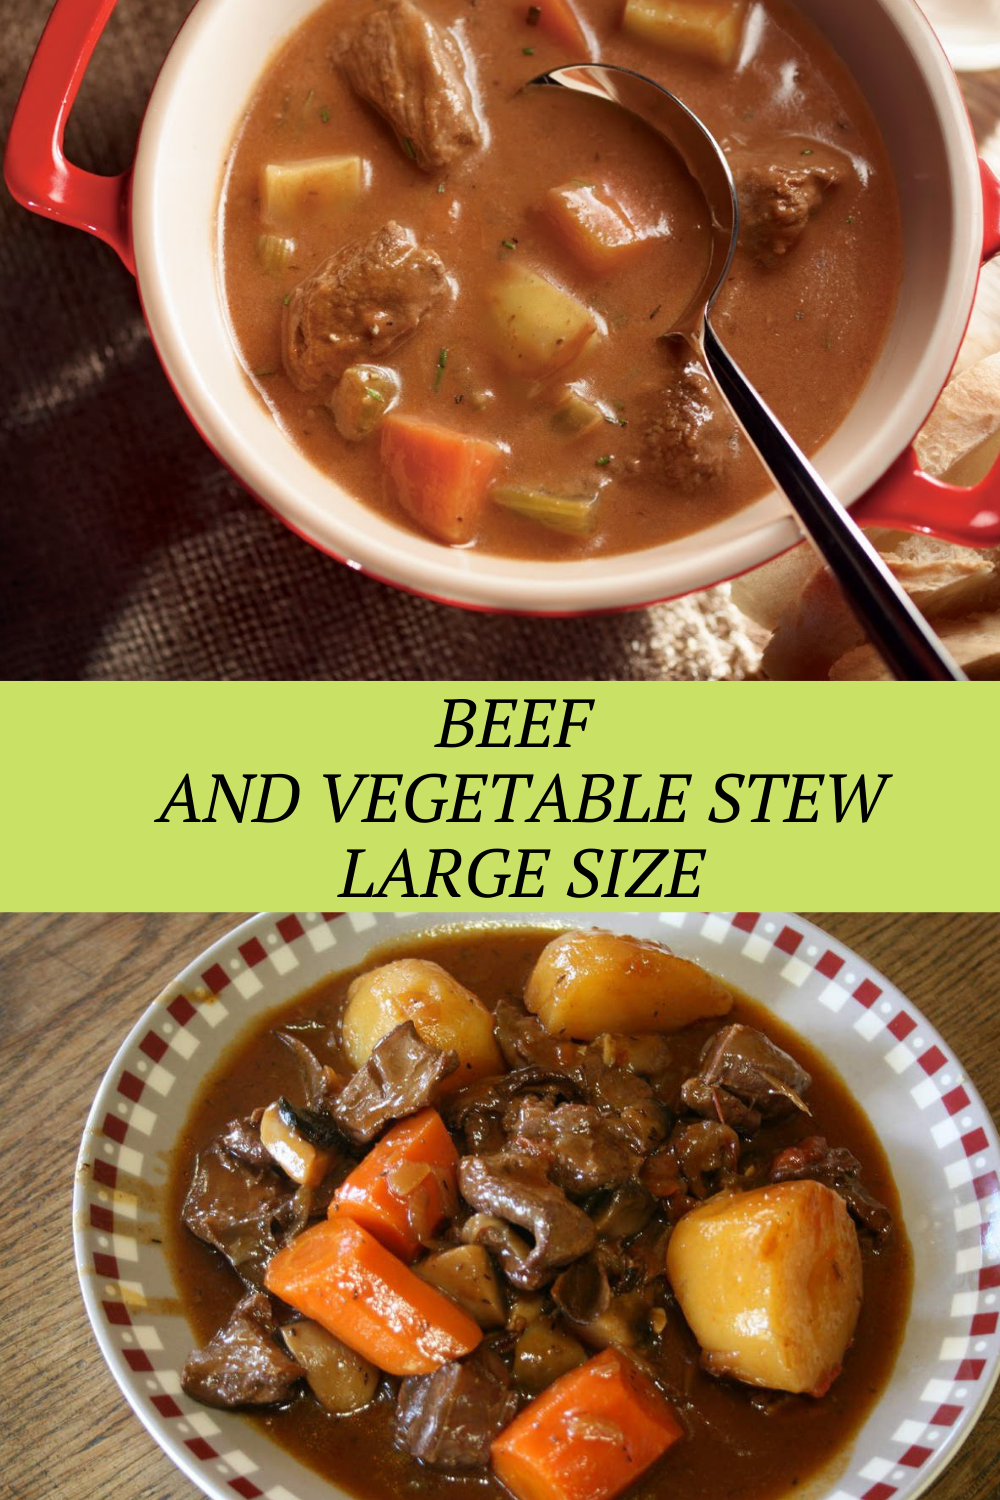 Beef and Vegetable Stew Large Size